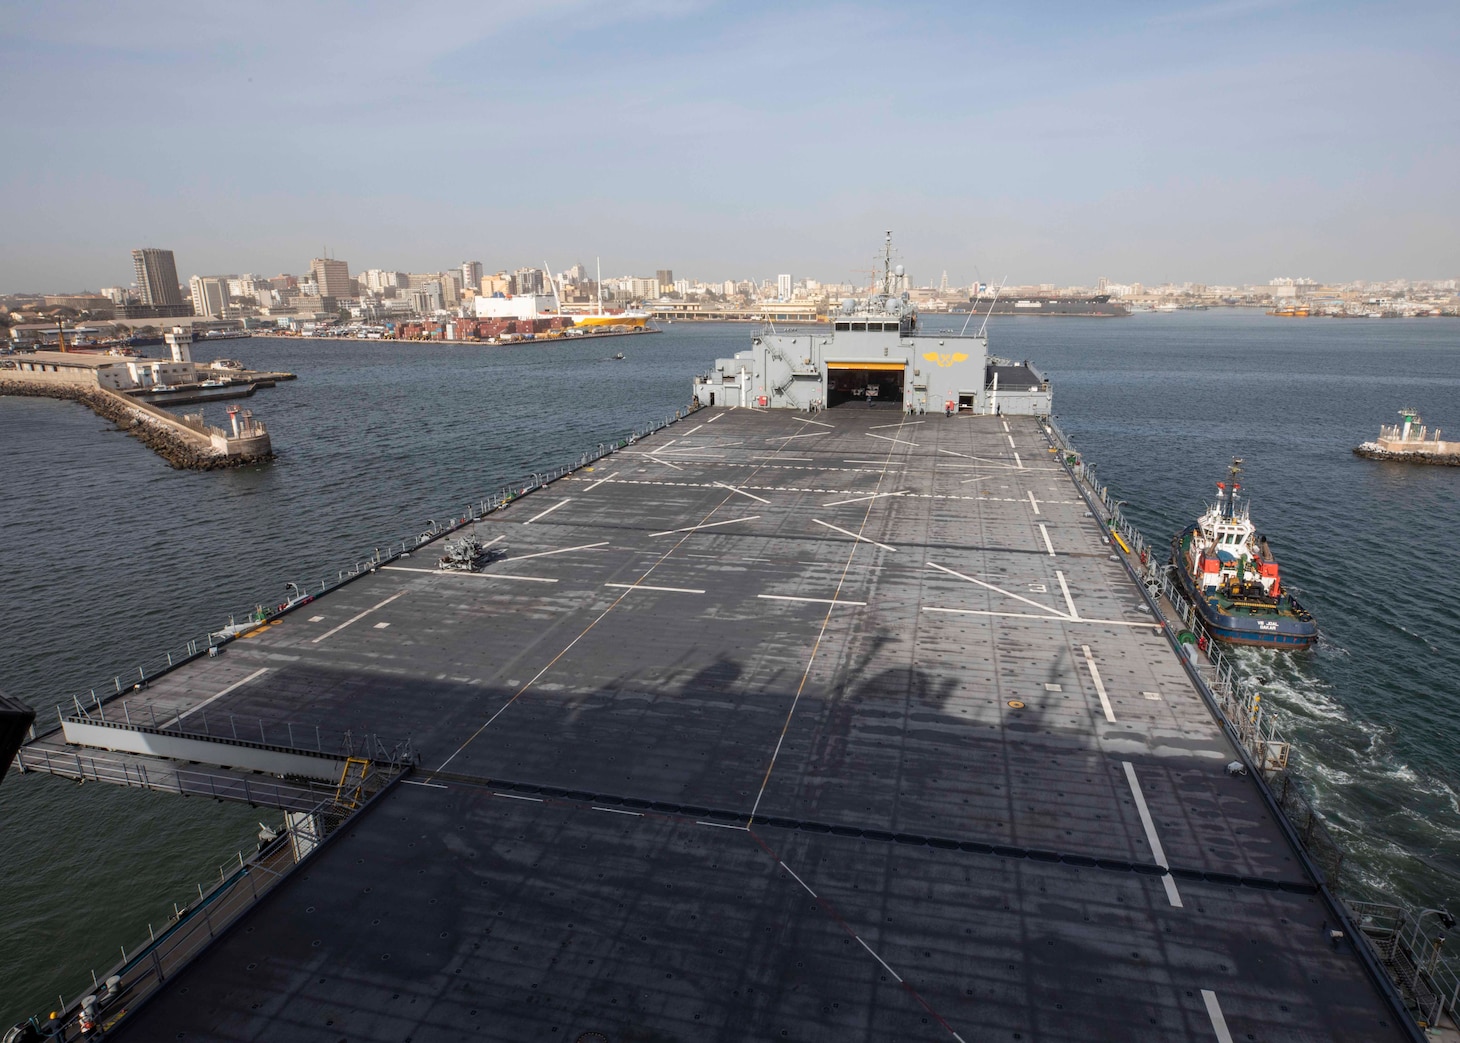 The Expeditionary Sea Base USS Hershel "Woody" Williams (ESB 4), enters the port of Dakar, Senegal, to participate in the multinational exercise Obangame Express, March 10, 2022.